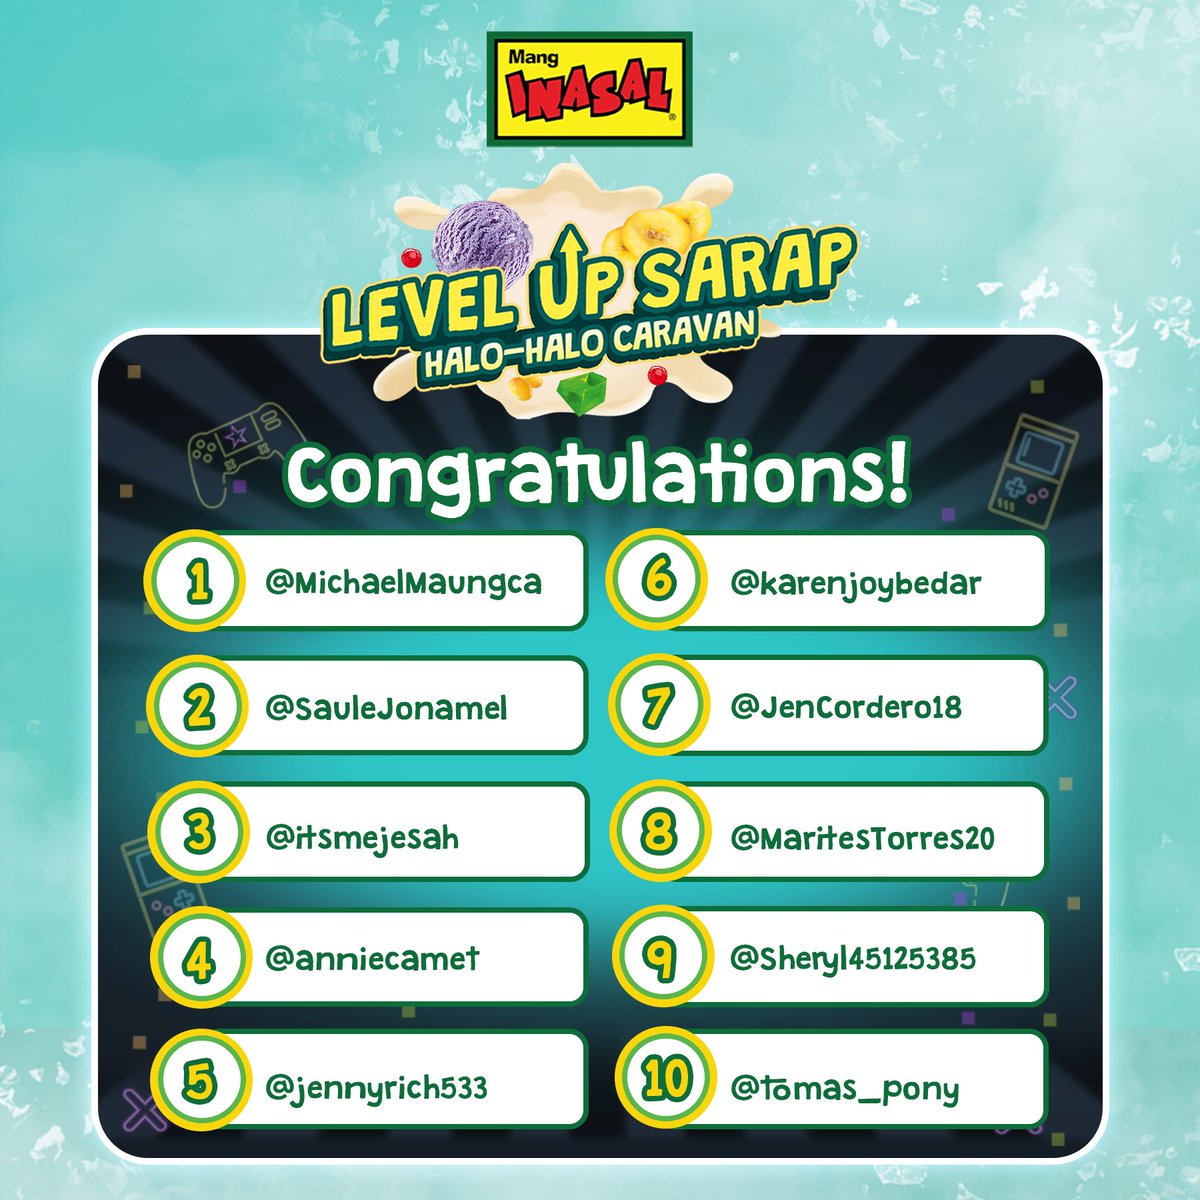 CONGRATULATIONS to our #MangInasalLevelUpSARAP Twitter Party winners! 👏 Stay tuned for more Level Up Sarap and Saya parties with us! 🥳

#ILoveMangInasal💚💛